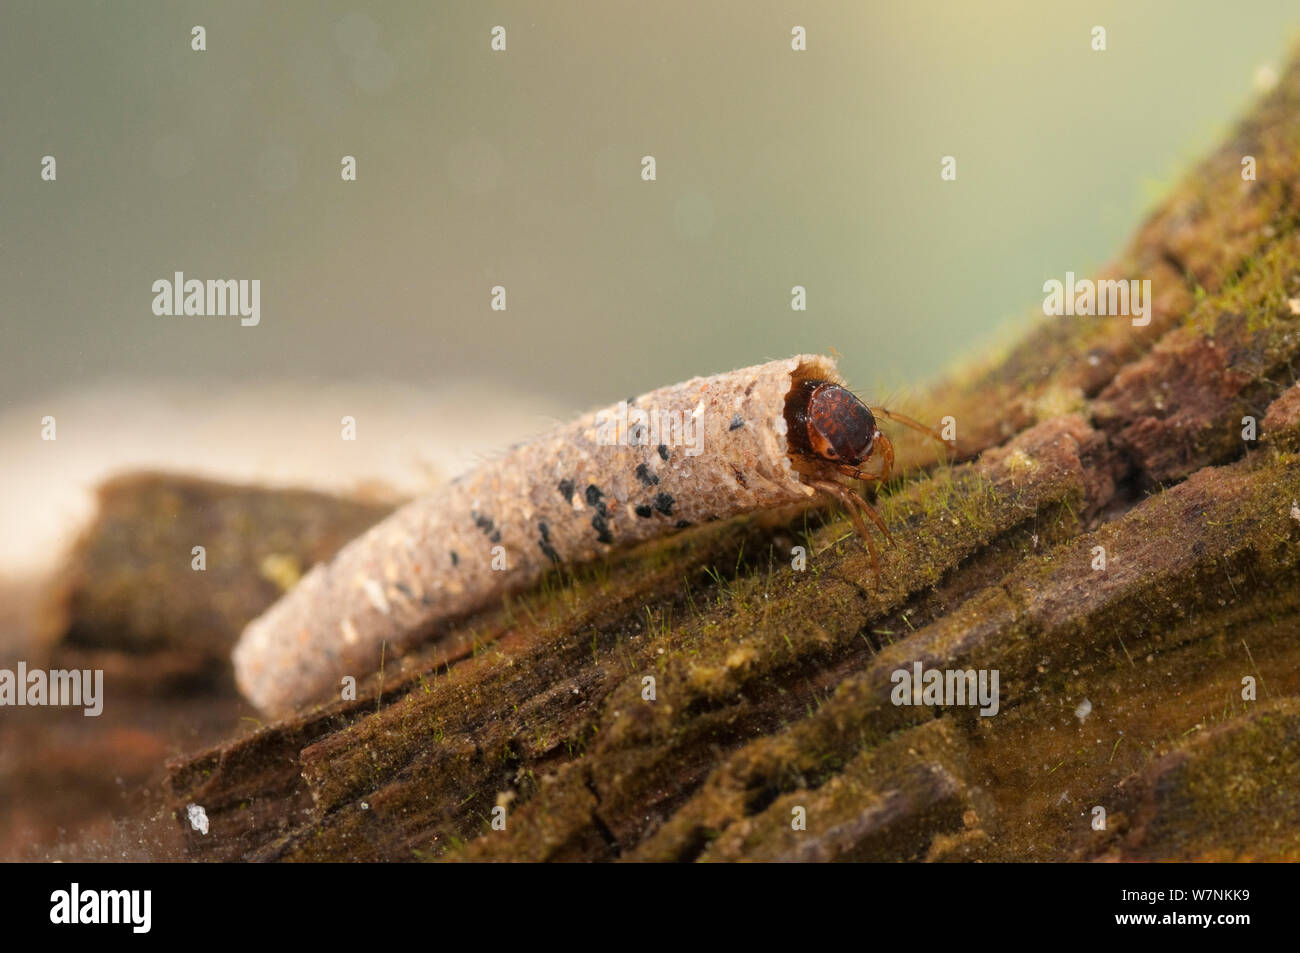 Case-building caddisfly (Trichoptera) larva in protective case made of sand grains, Europe, April, controlled conditions Stock Photo